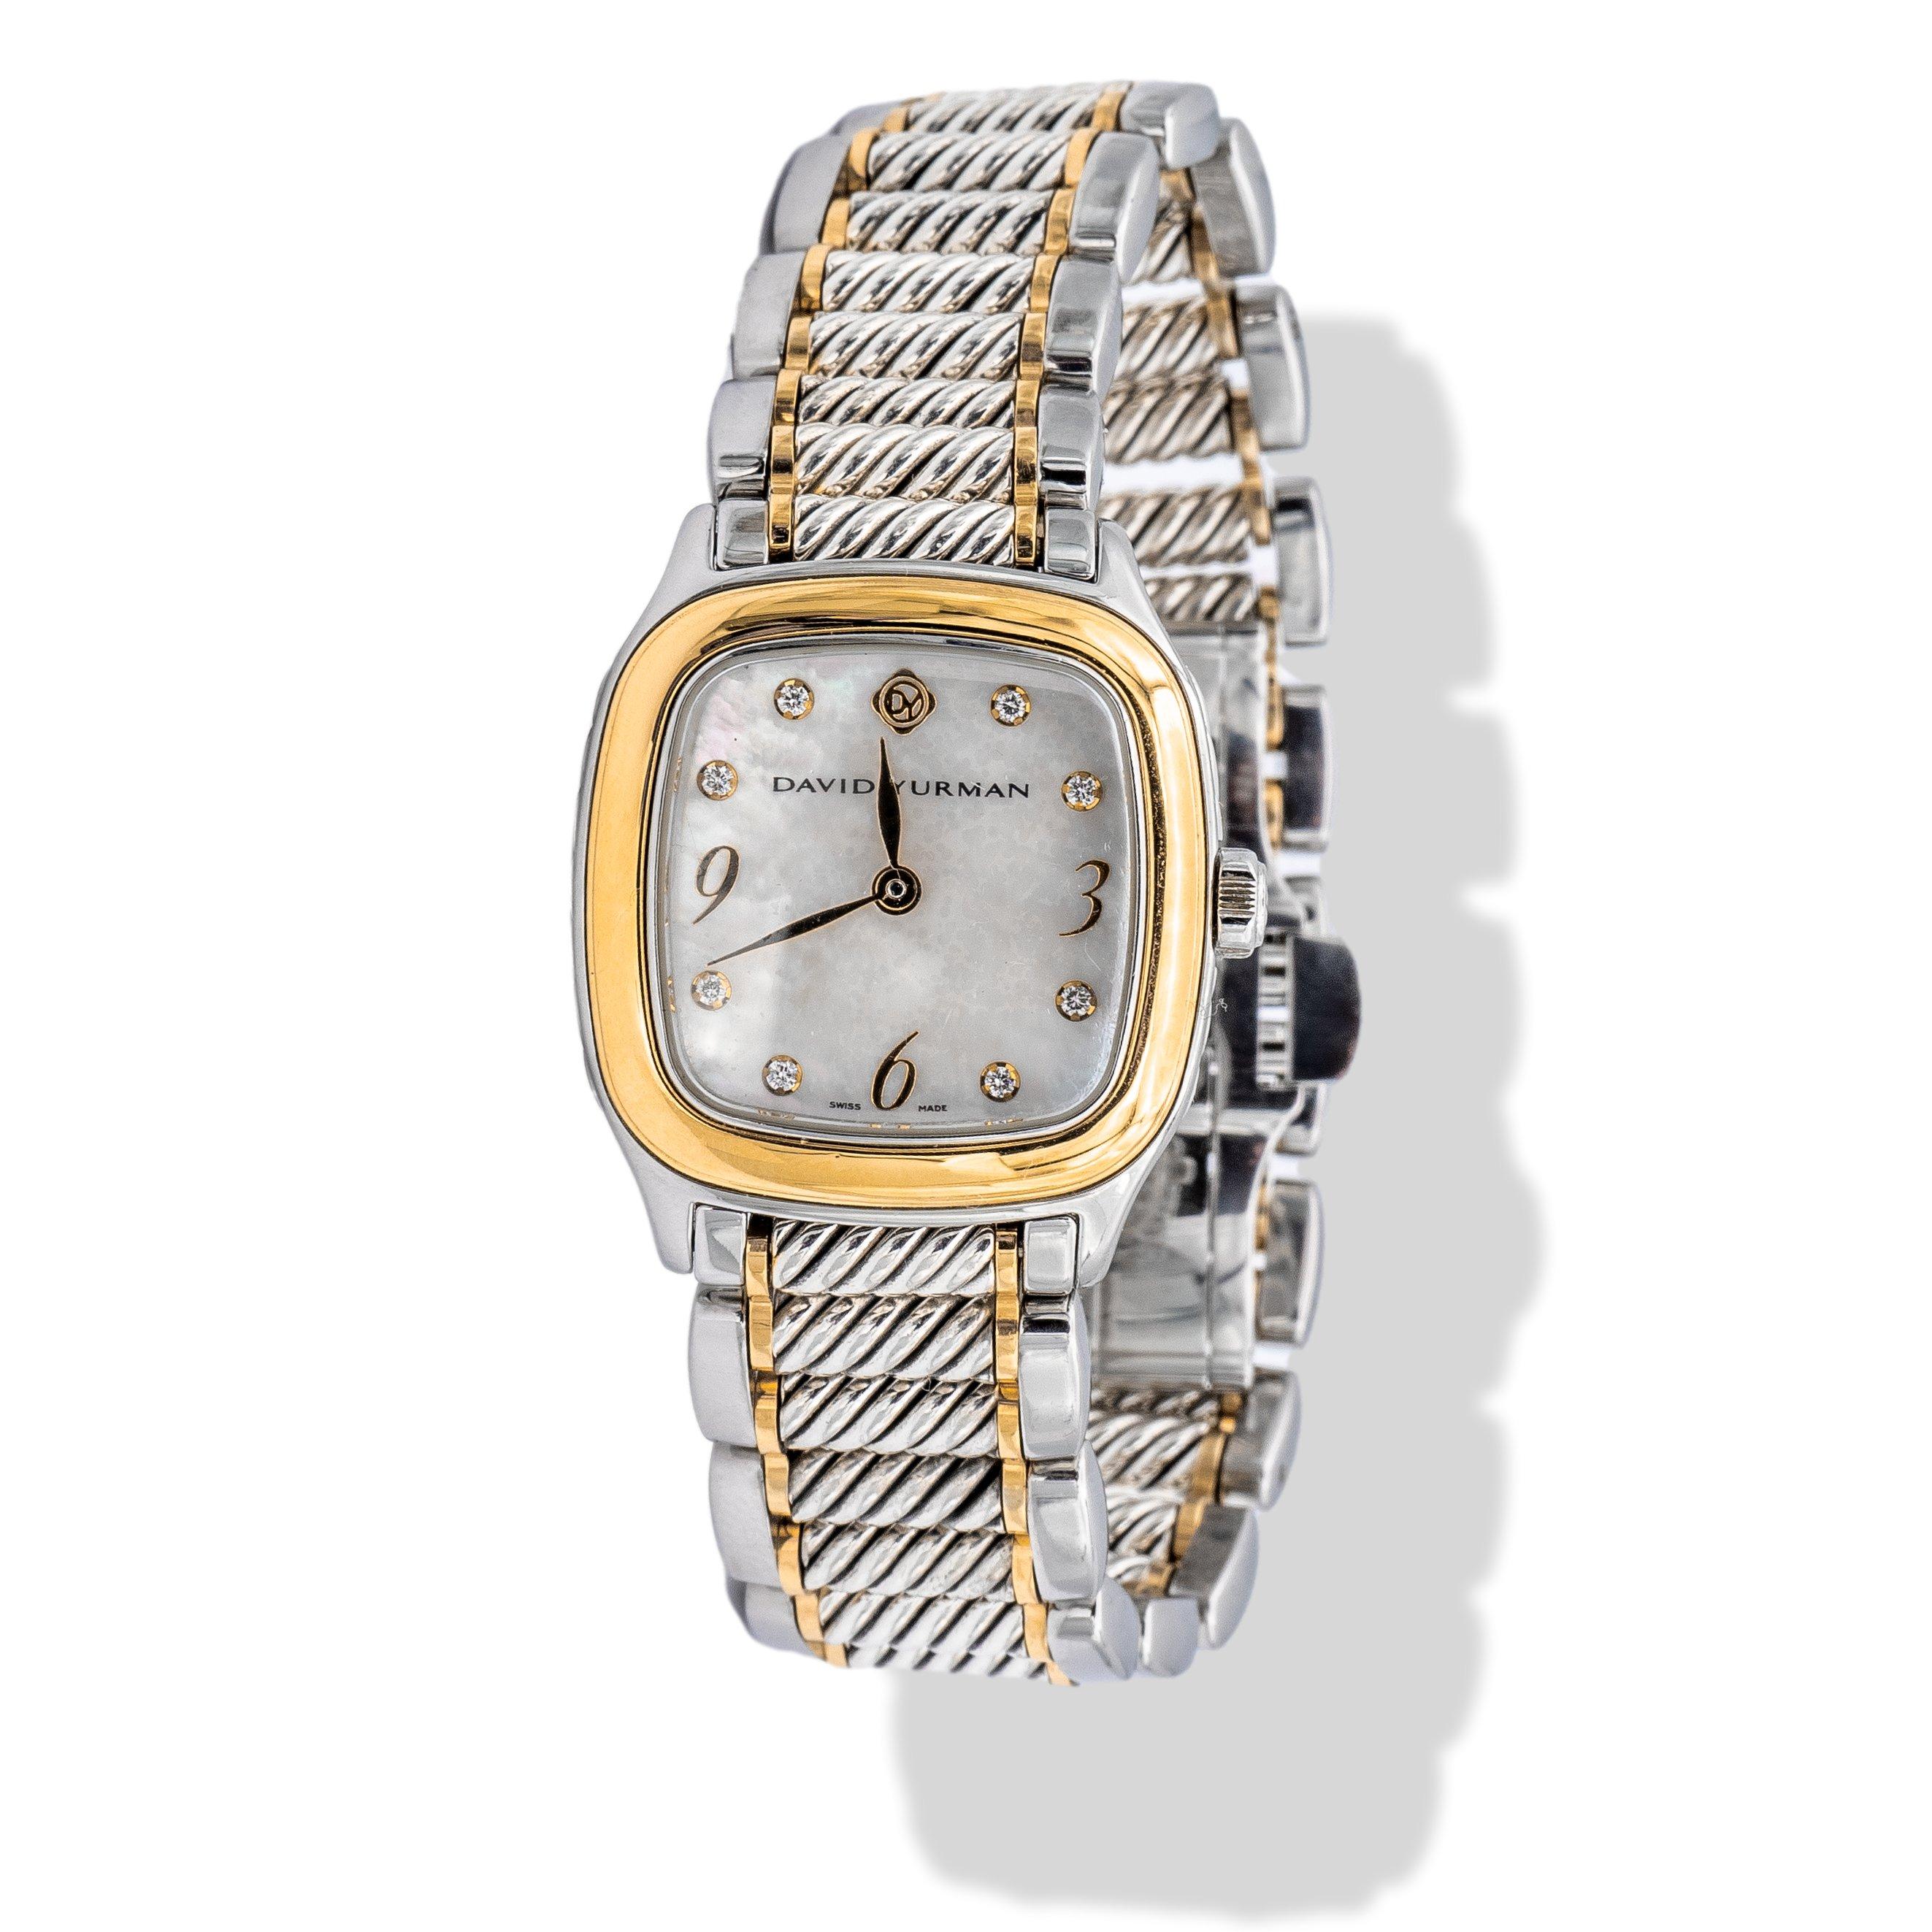 Vintage David Yurman Sterling Silver and Gold Cable Link watch with sapphire crystal is a timepiece that combines classic design elements with modern materials. The watch features a cable link bracelet made of stainless steel and 18K yellow gold,